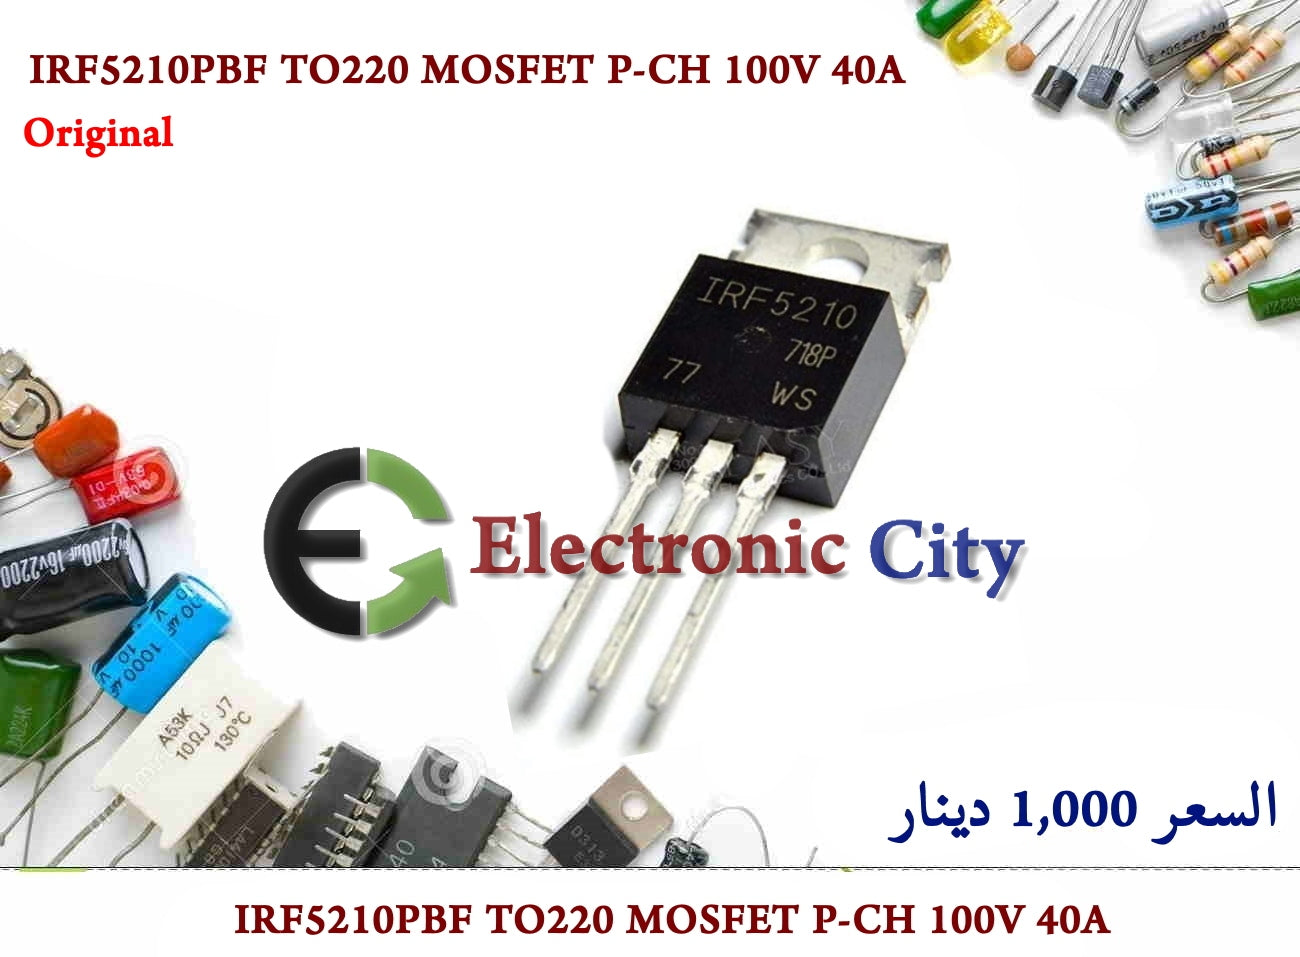 IRF5210PBF TO220 MOSFET P-CH 100V 40A